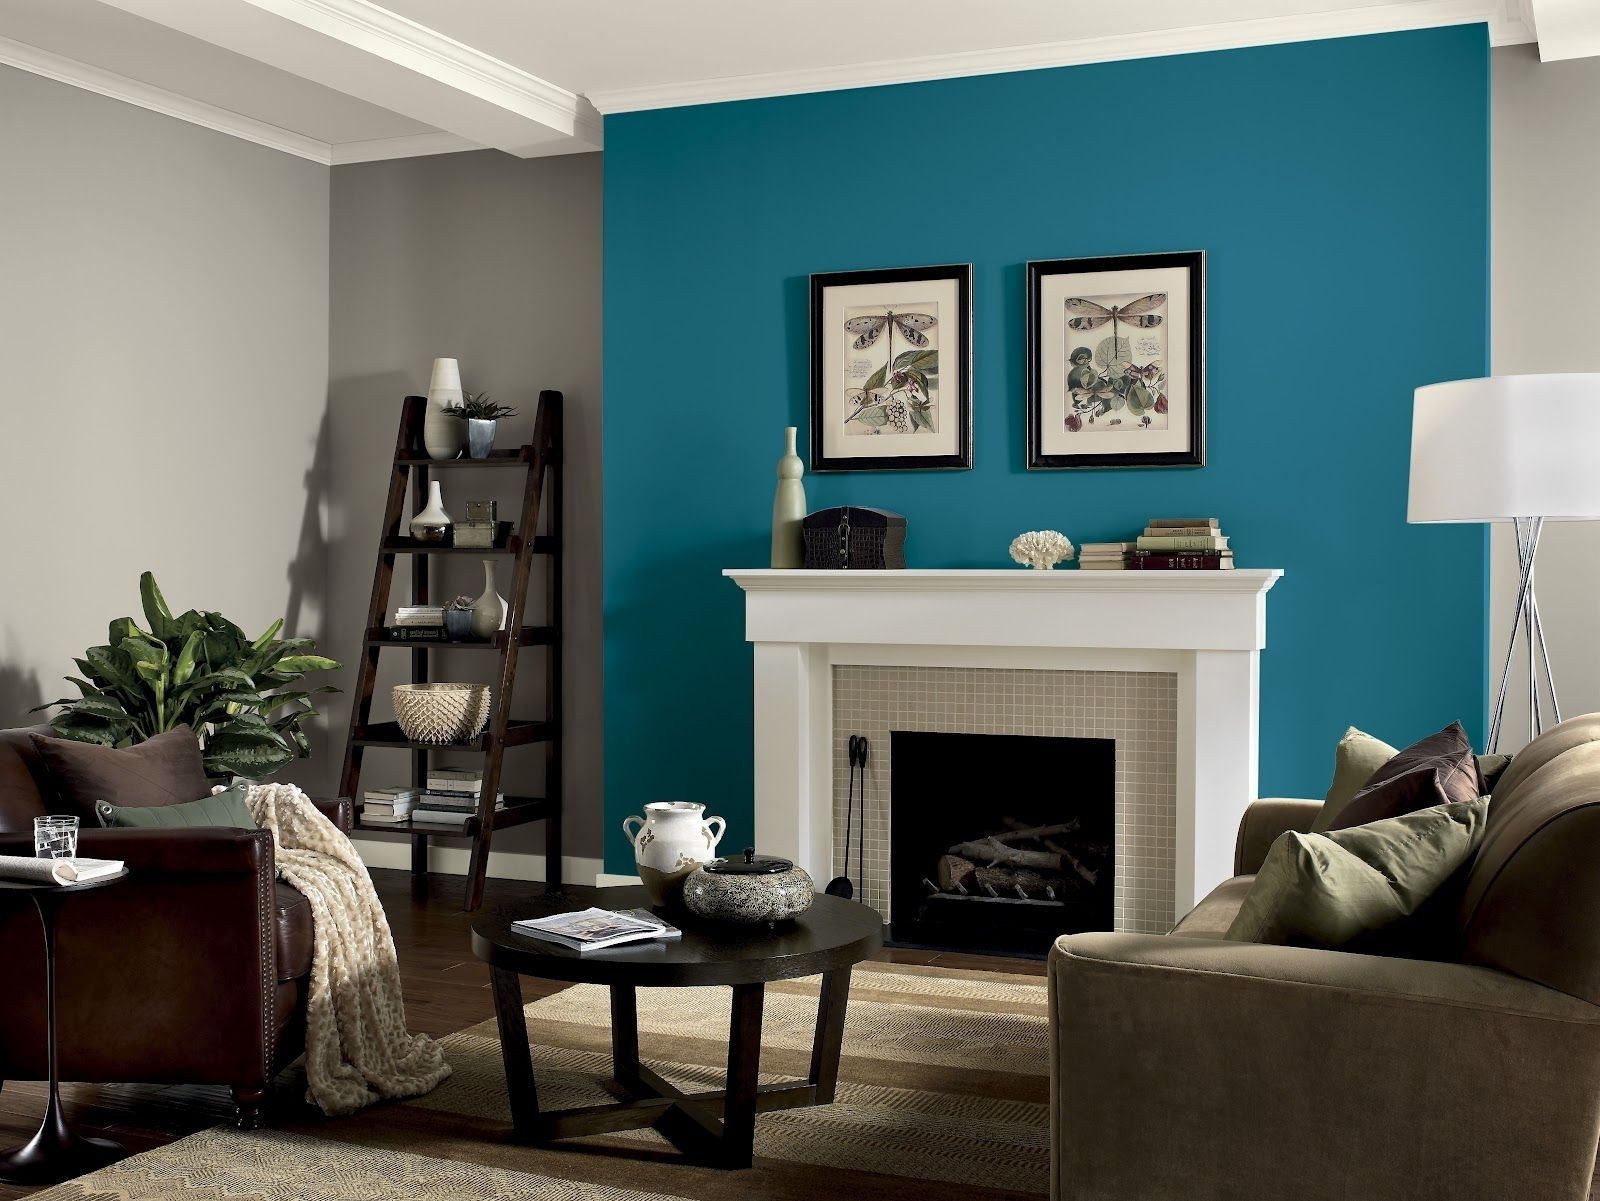 Choosing Paint Colors For Living Room Walls